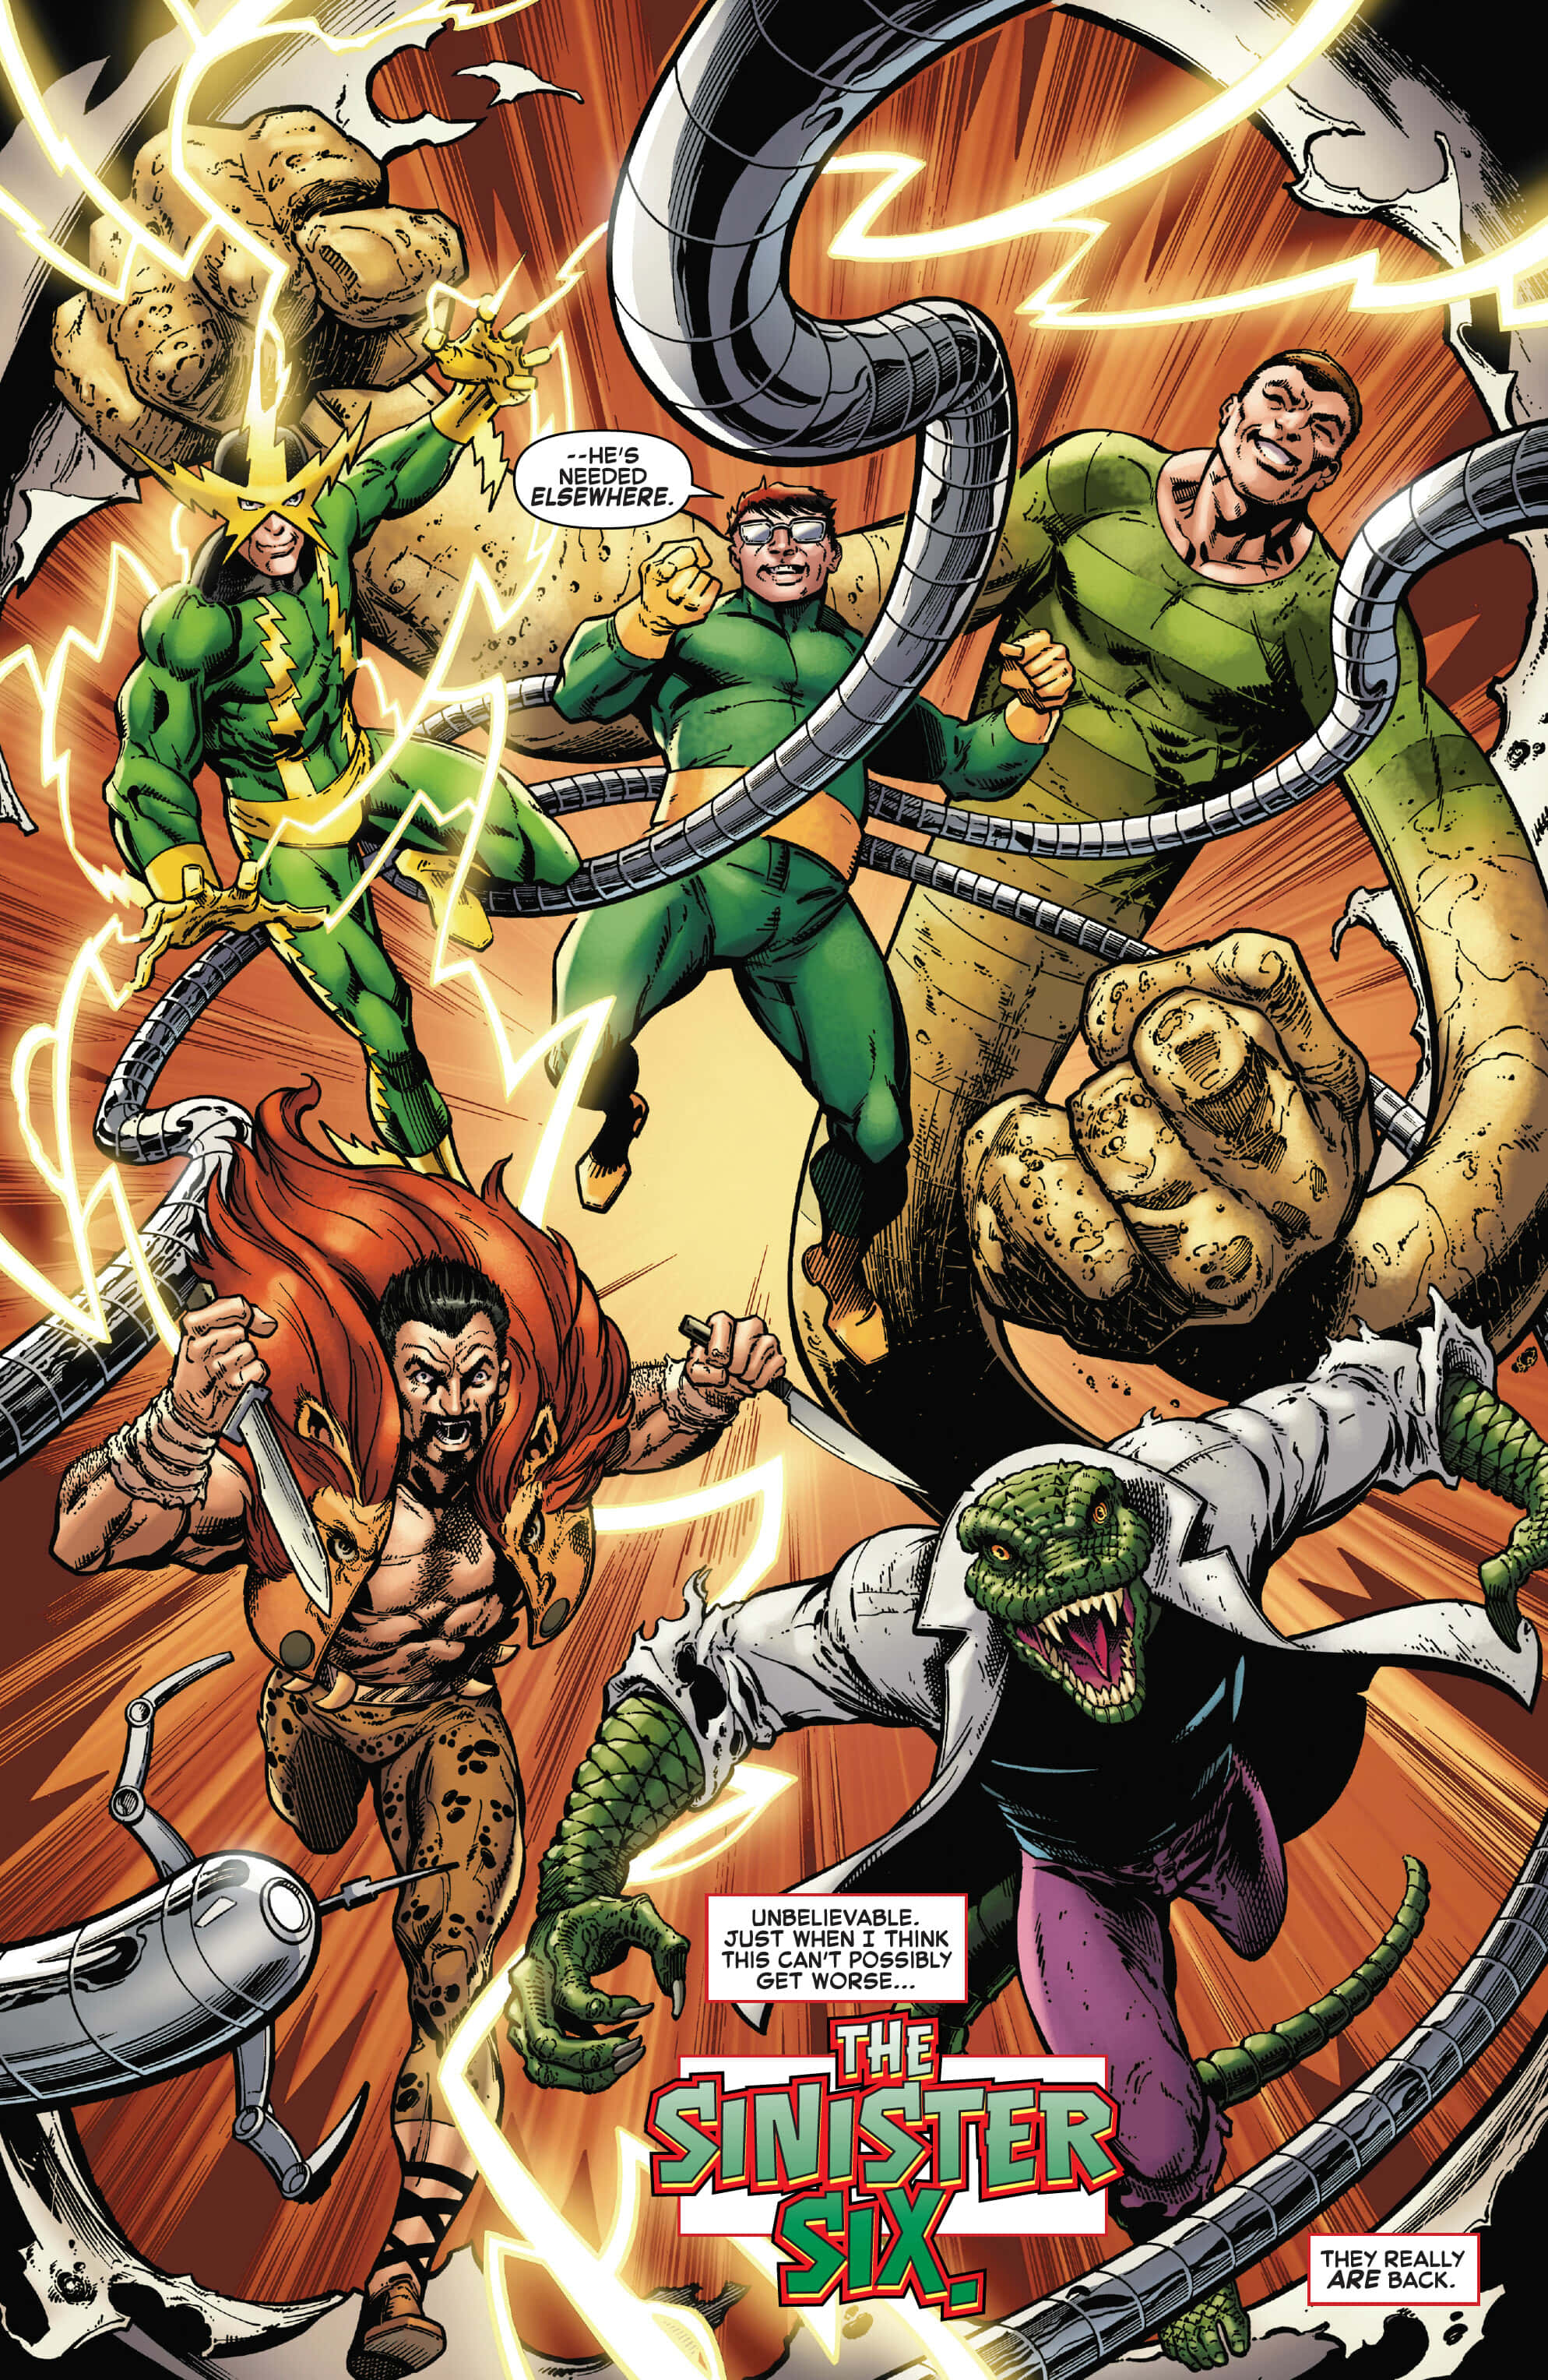 The Sinister Six assemble for battle in a thrilling confrontation Wallpaper